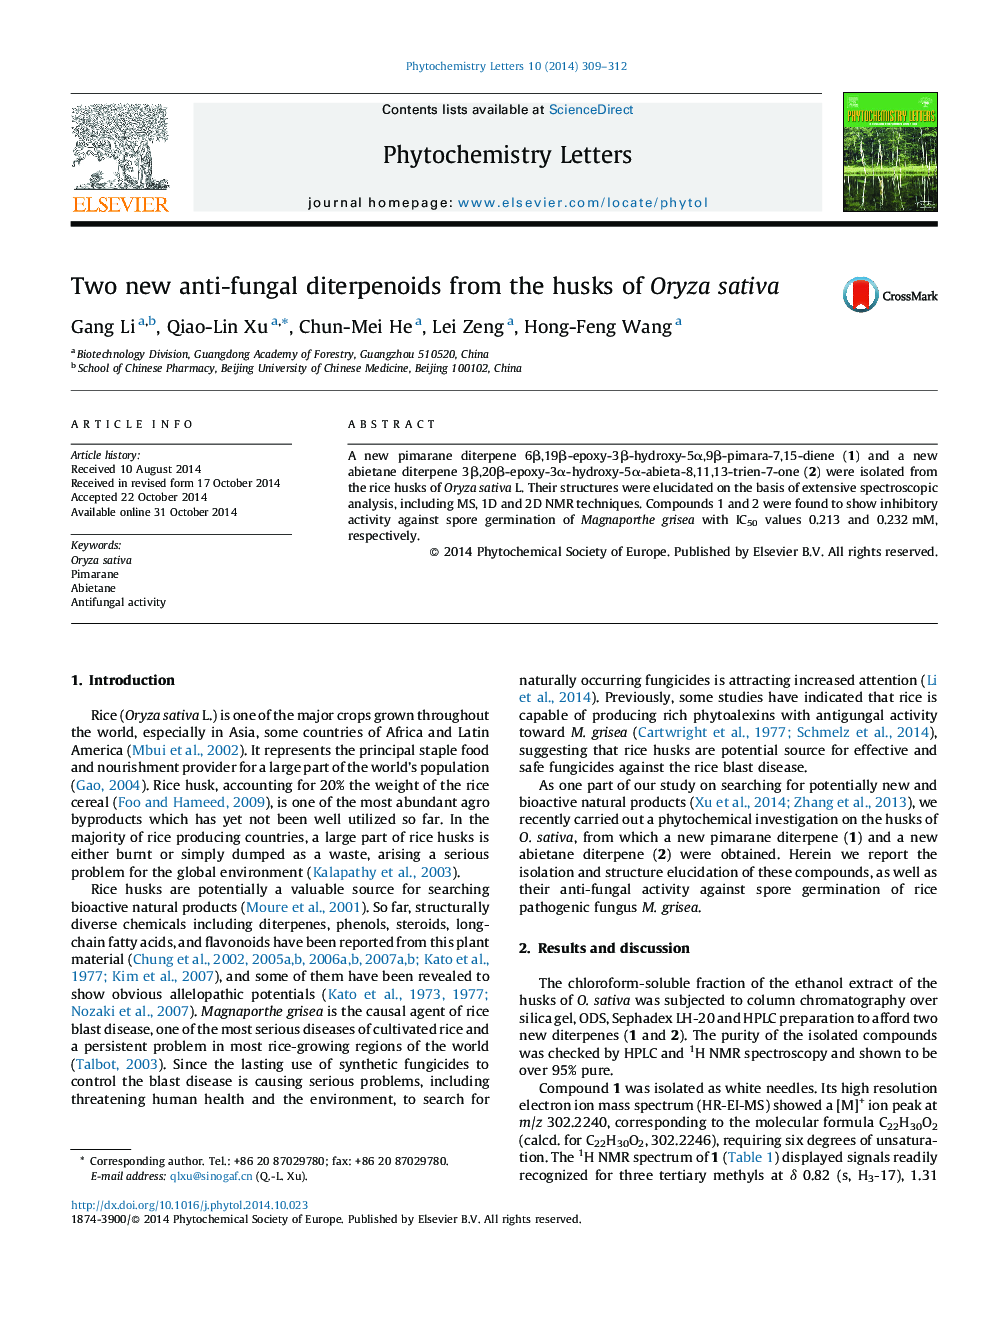 Two new anti-fungal diterpenoids from the husks of Oryza sativa